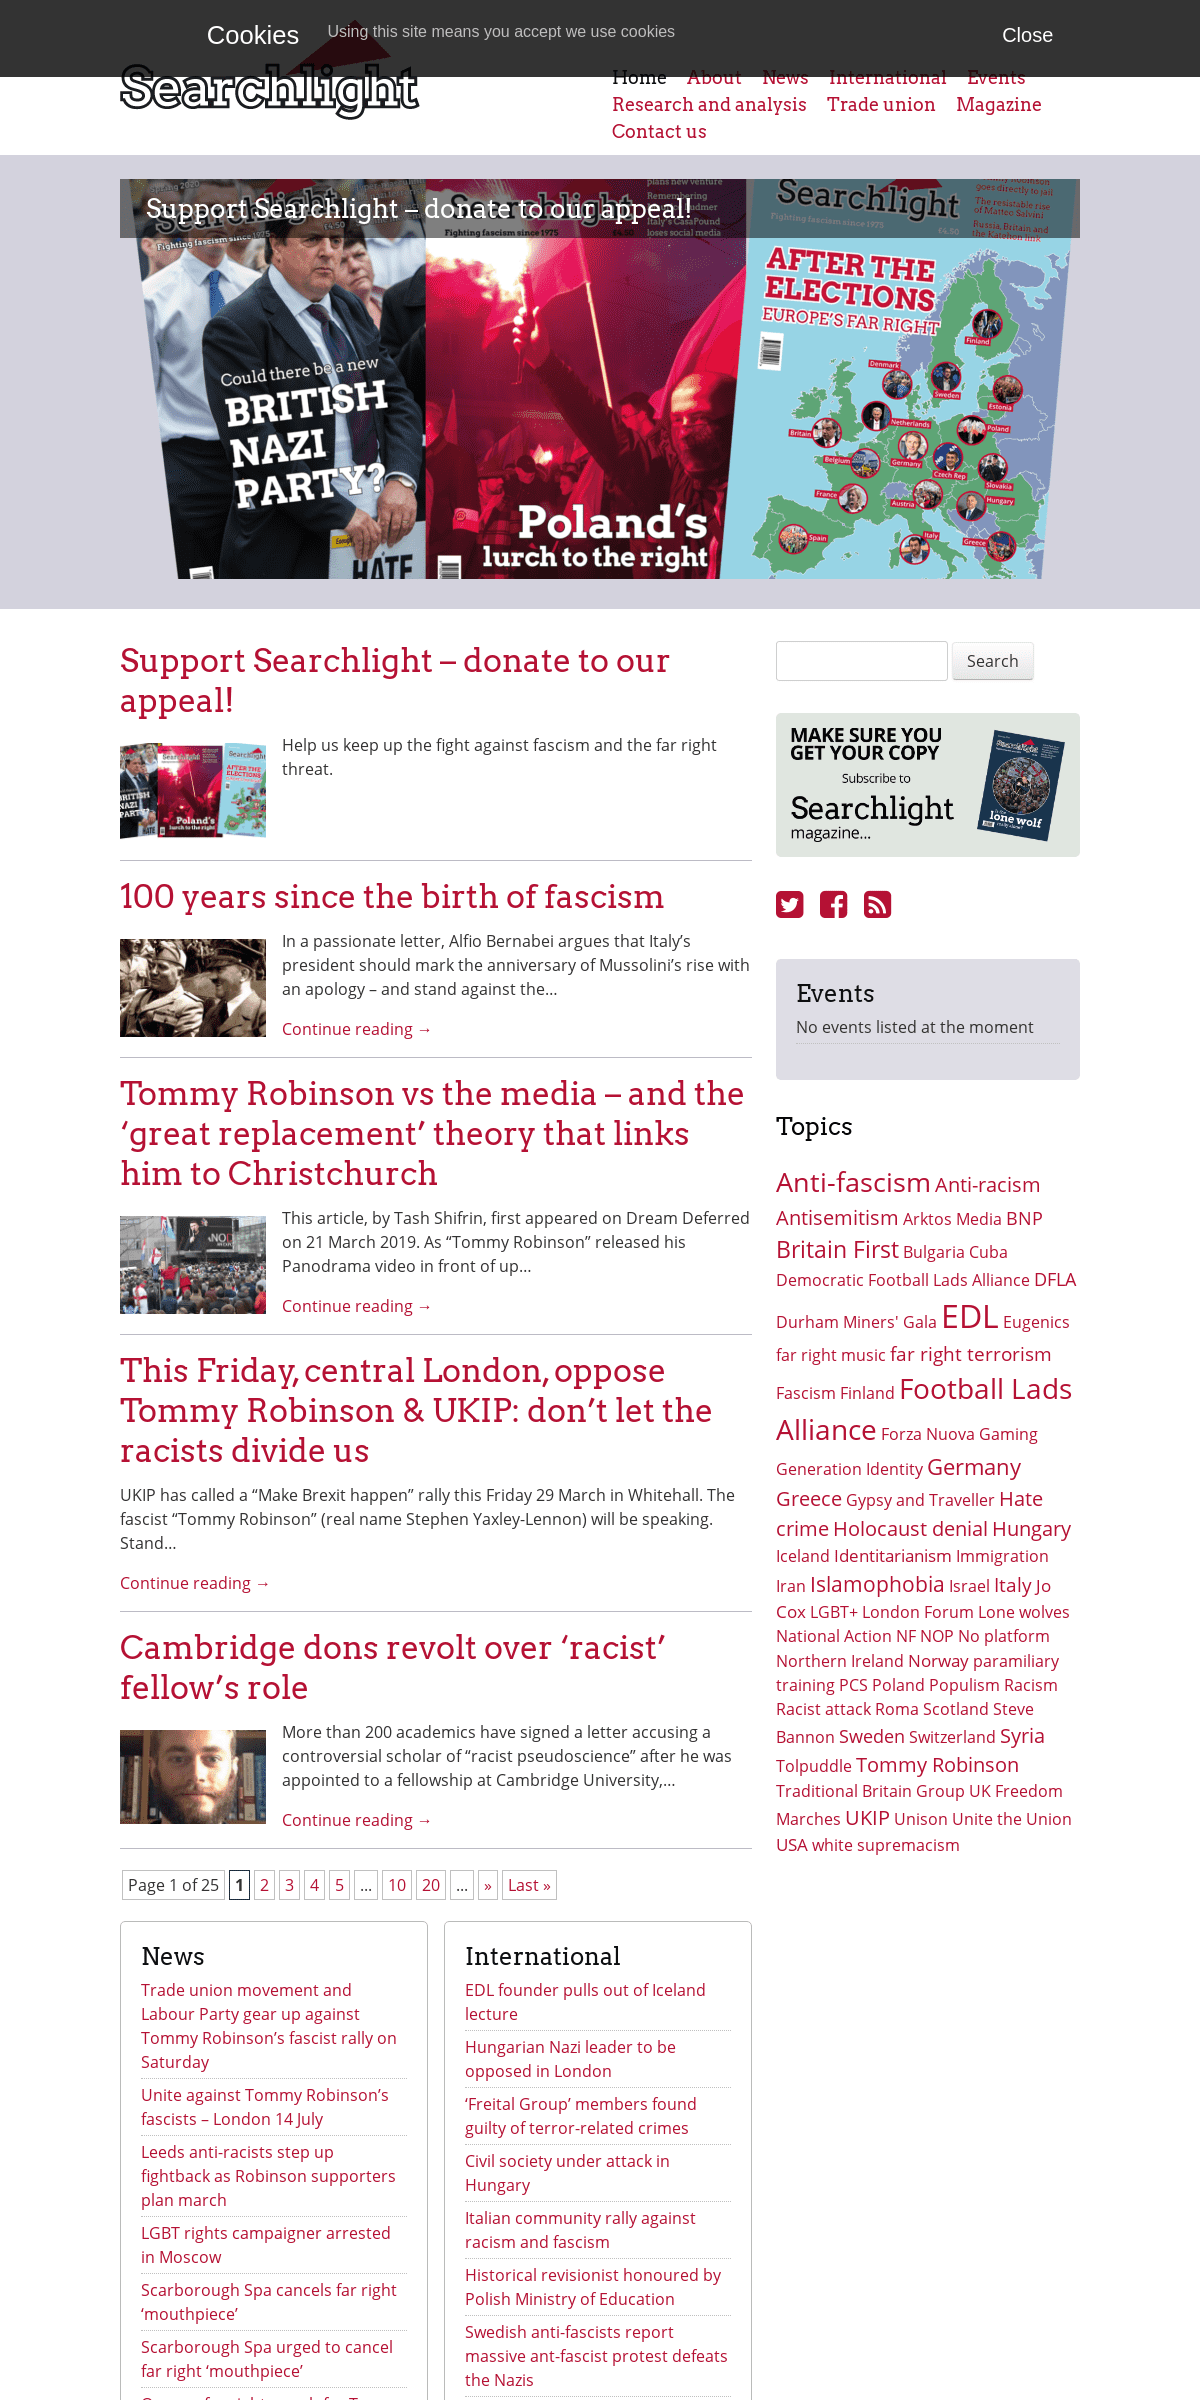 A complete backup of searchlightmagazine.com